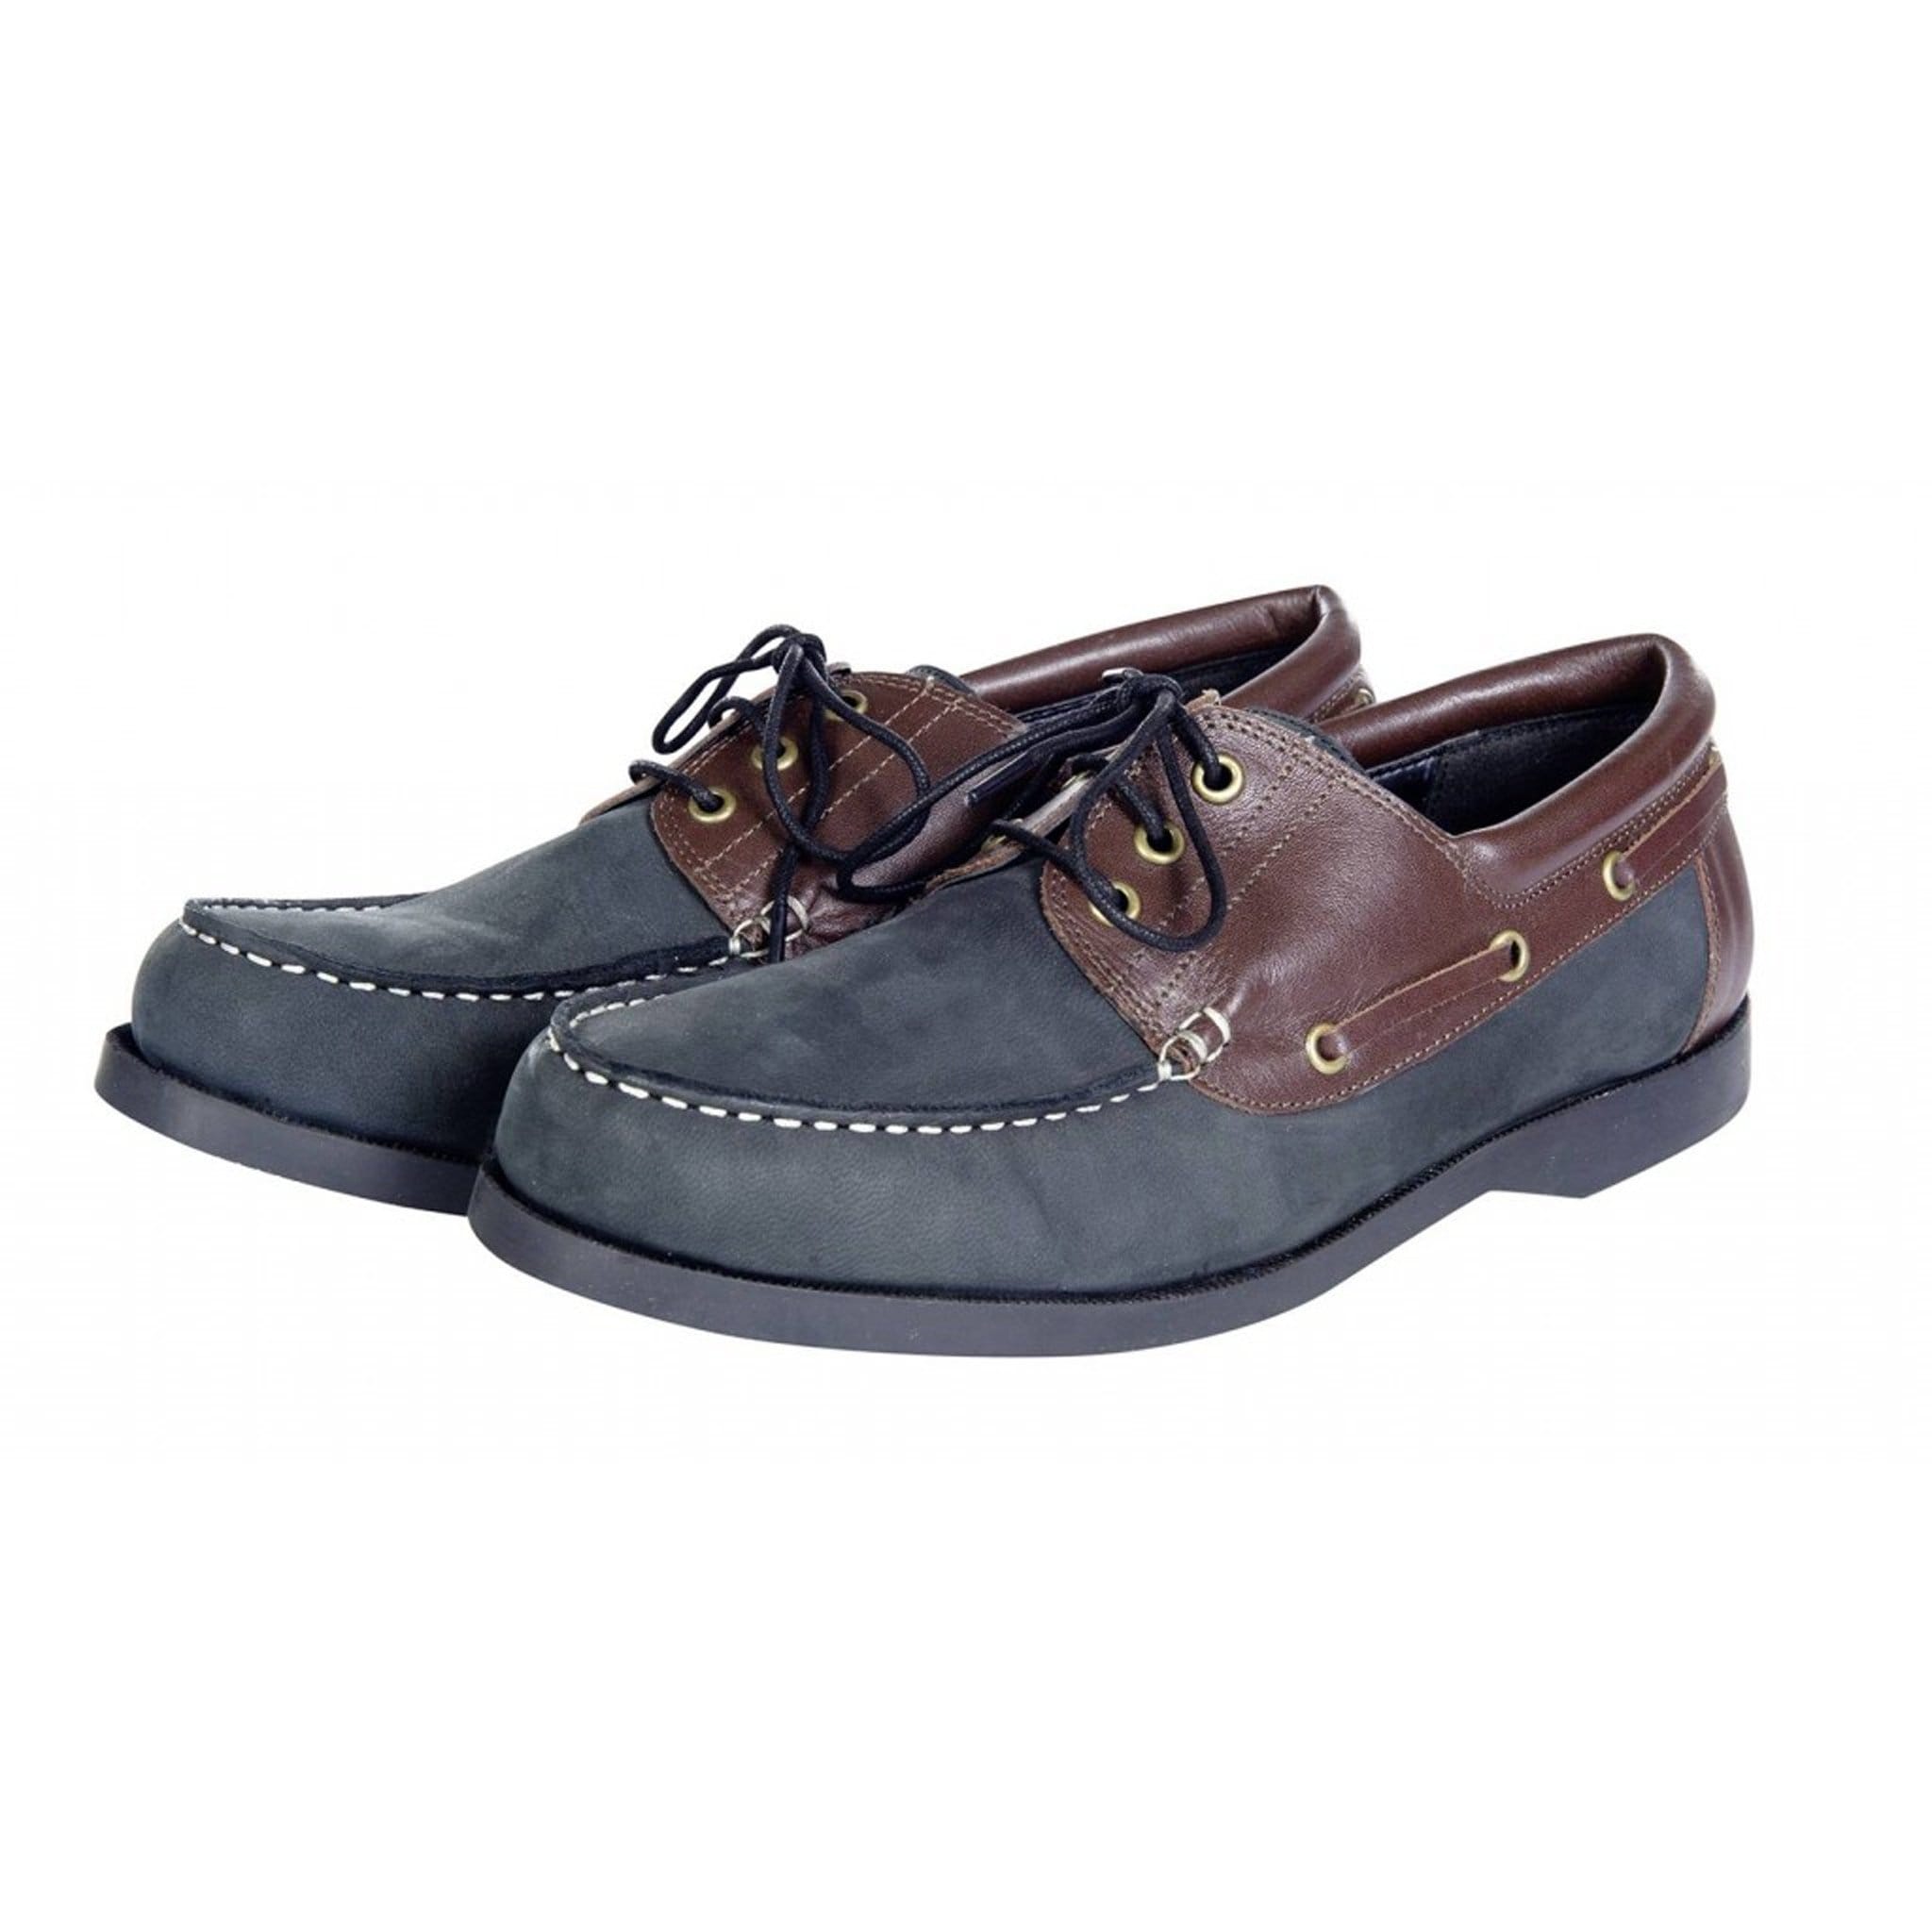 10042 HKM Marbella Boat Shoes Front View